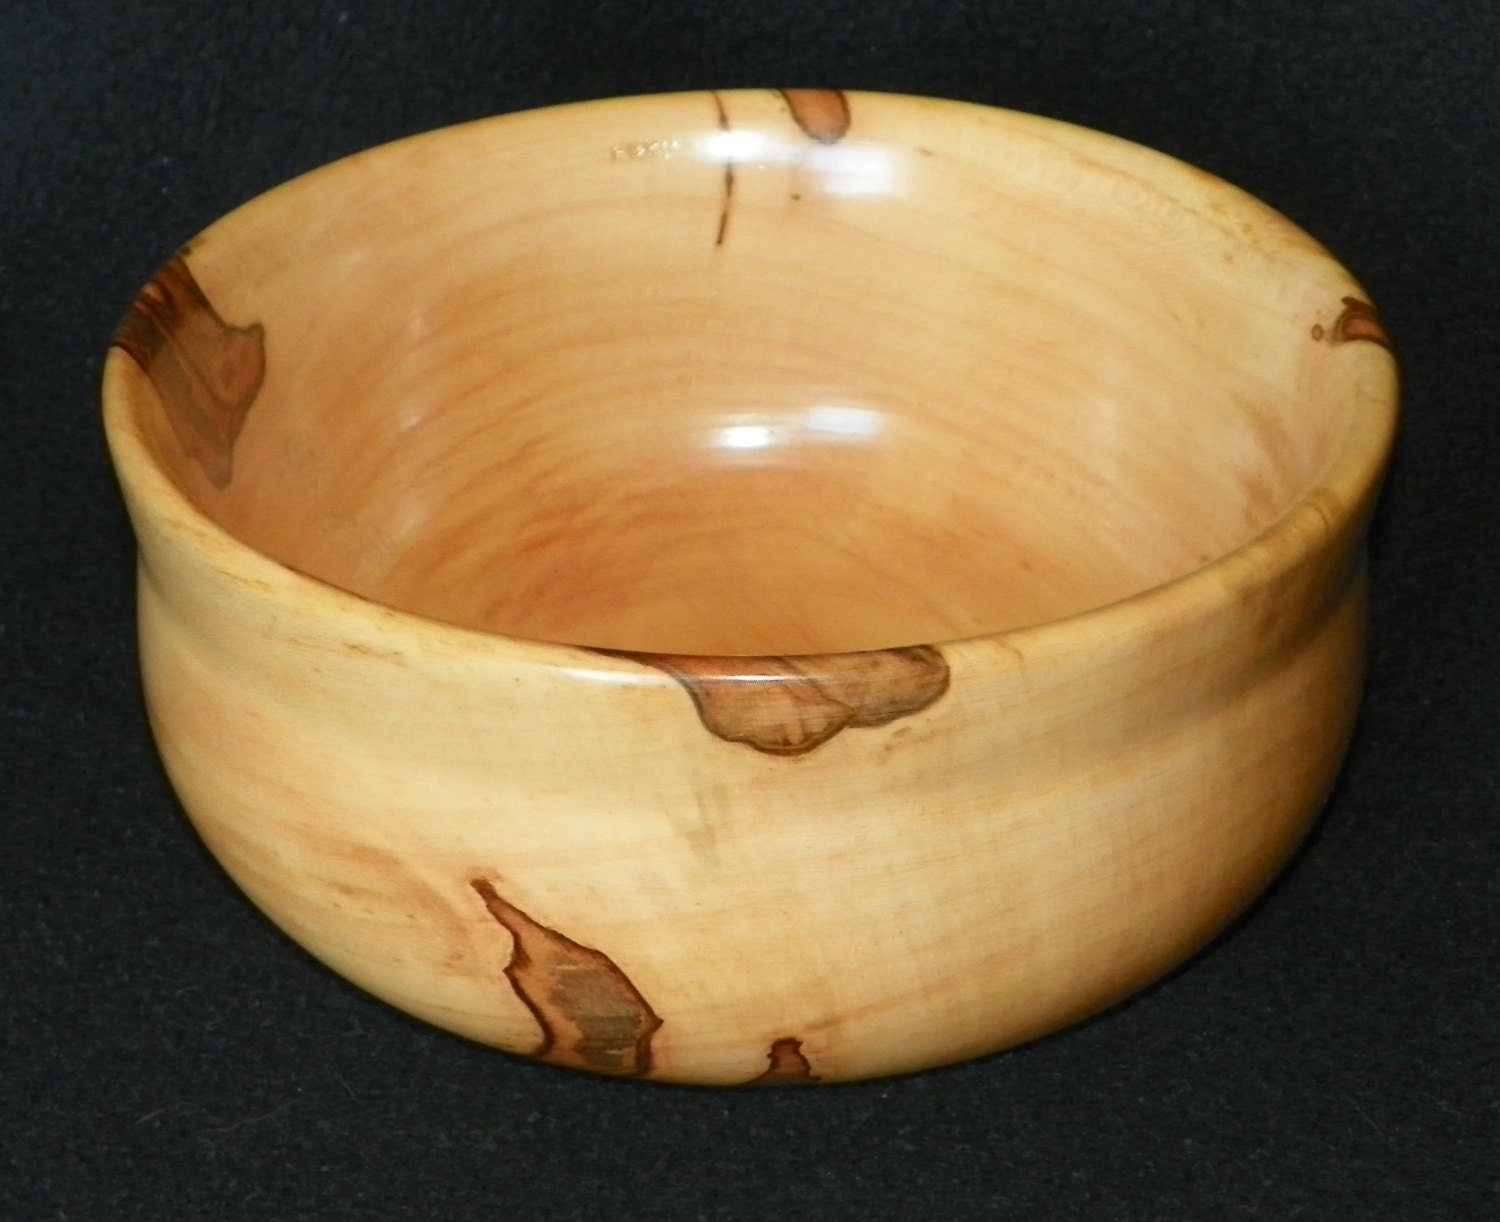 Hand Turned Ambrosia Maple Wooden Bowl - 7 1/4 inches diameter X 3 1/4 inches height - OldRedBarnProduction